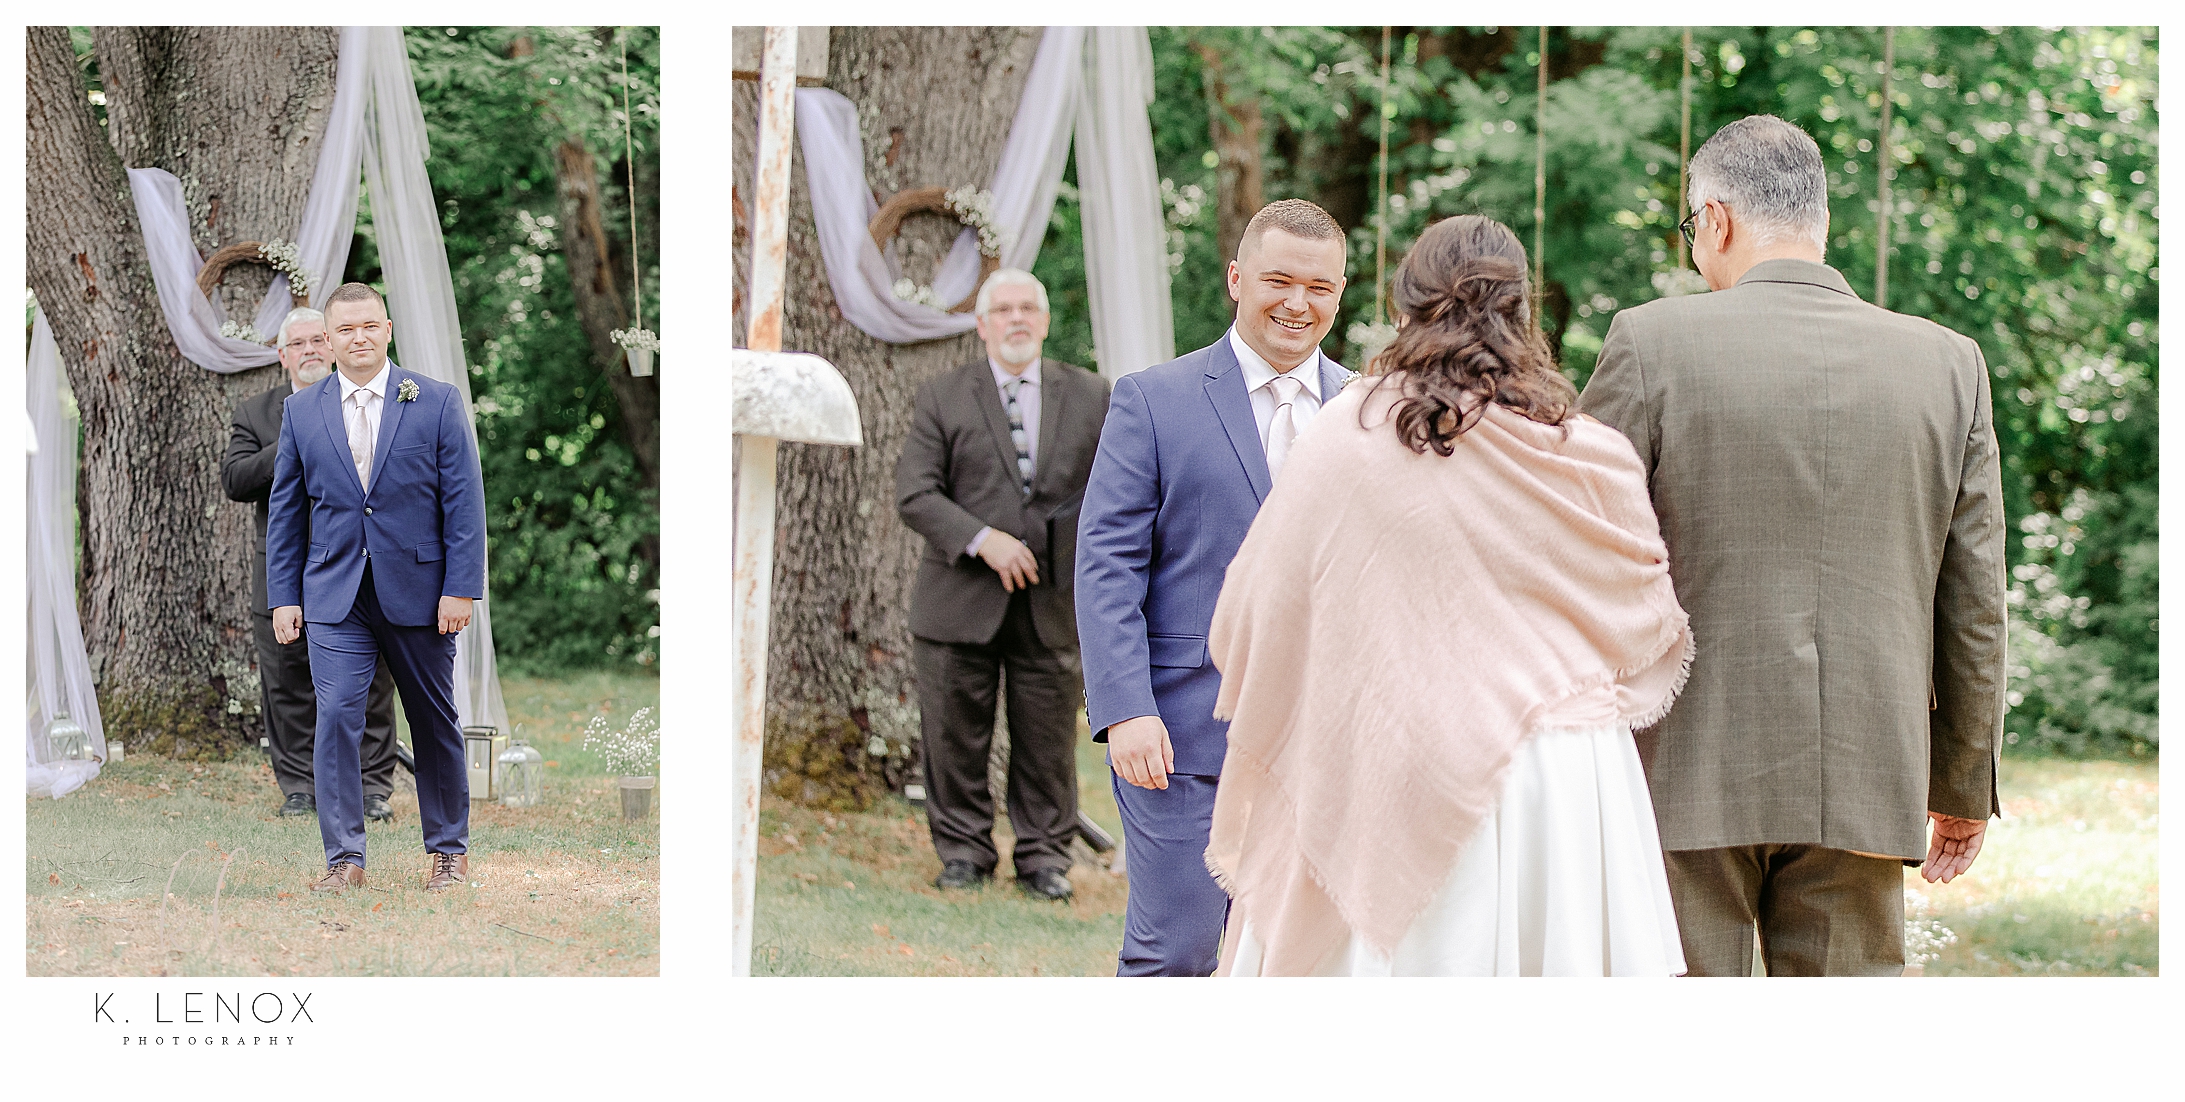 Light and Airy Backyard Elopement- showing the groom meeting his bride-to-be